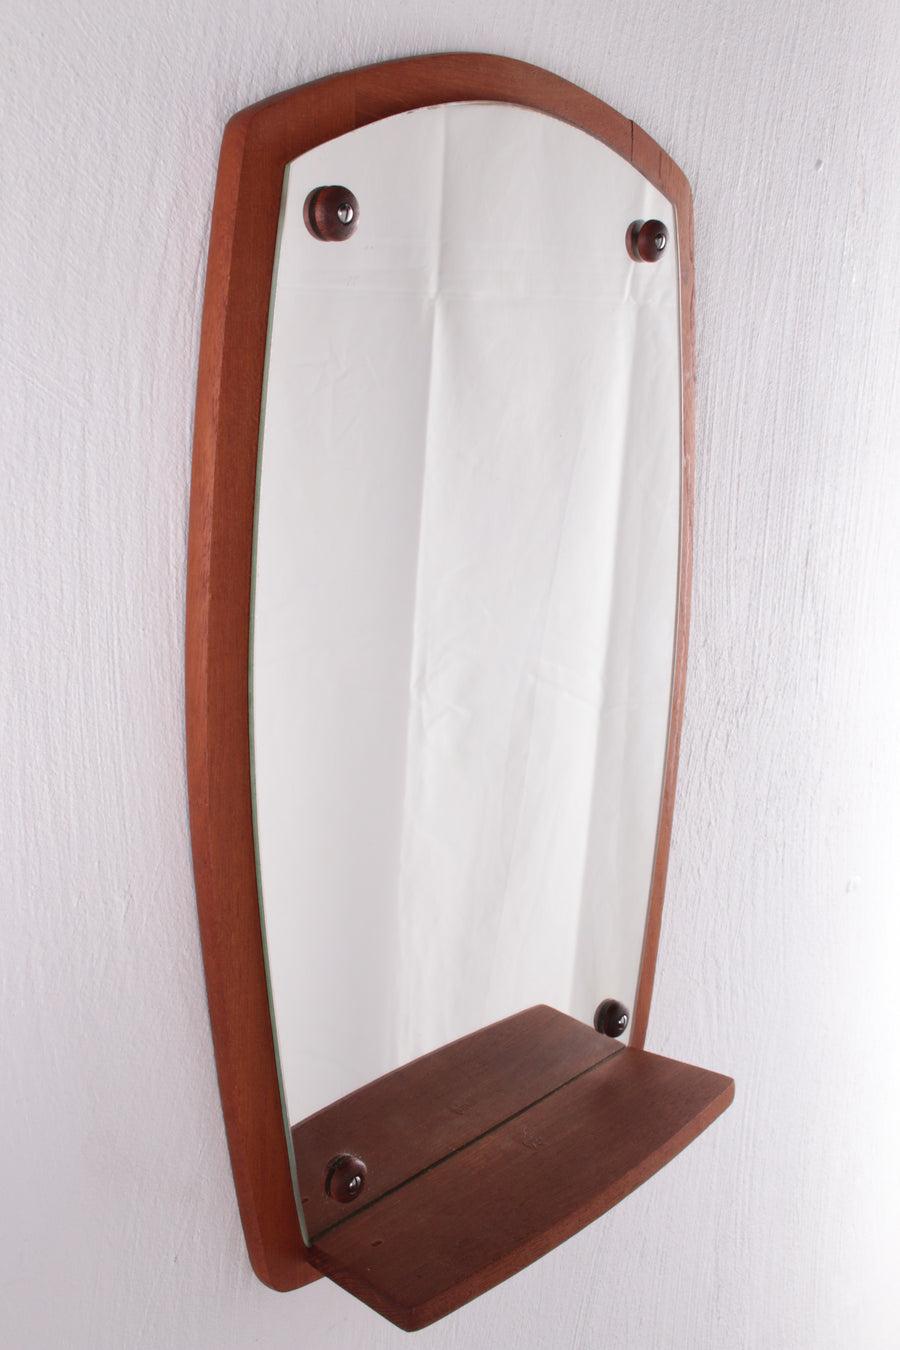 Danish Design Wall Mirror with Shelf Teak, 1960

Additional information: 
Dimensions: 30 W x 10 D x 50 H cm 
Period of Time: 1960
Country of origin: Denmark
Condition: In good condition